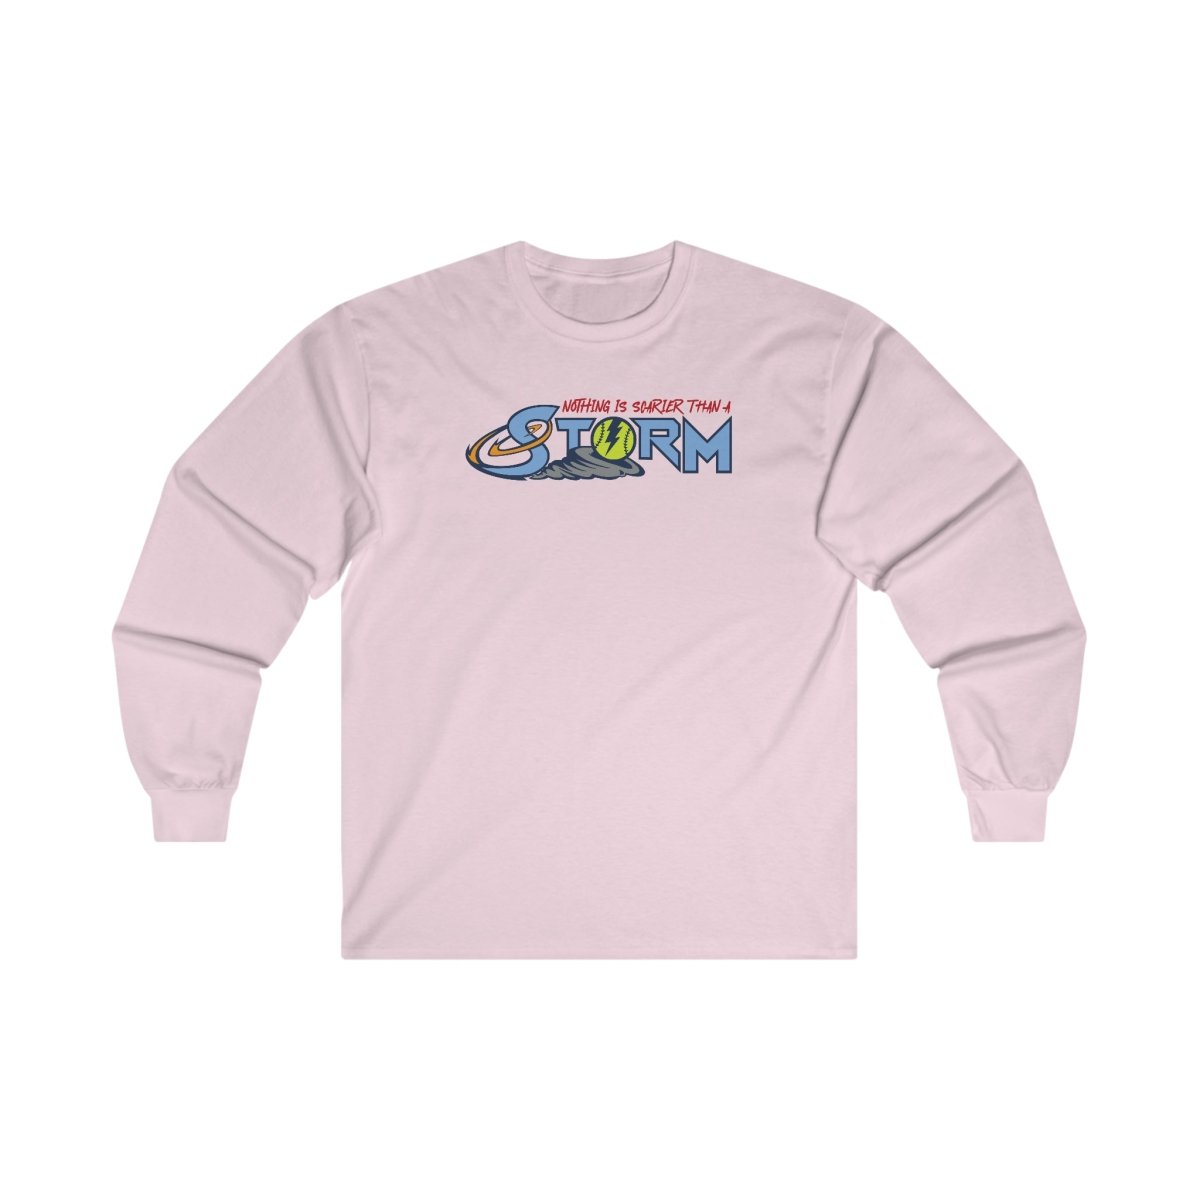 Nothing Is Scarier Cotton Long Sleeve Tee